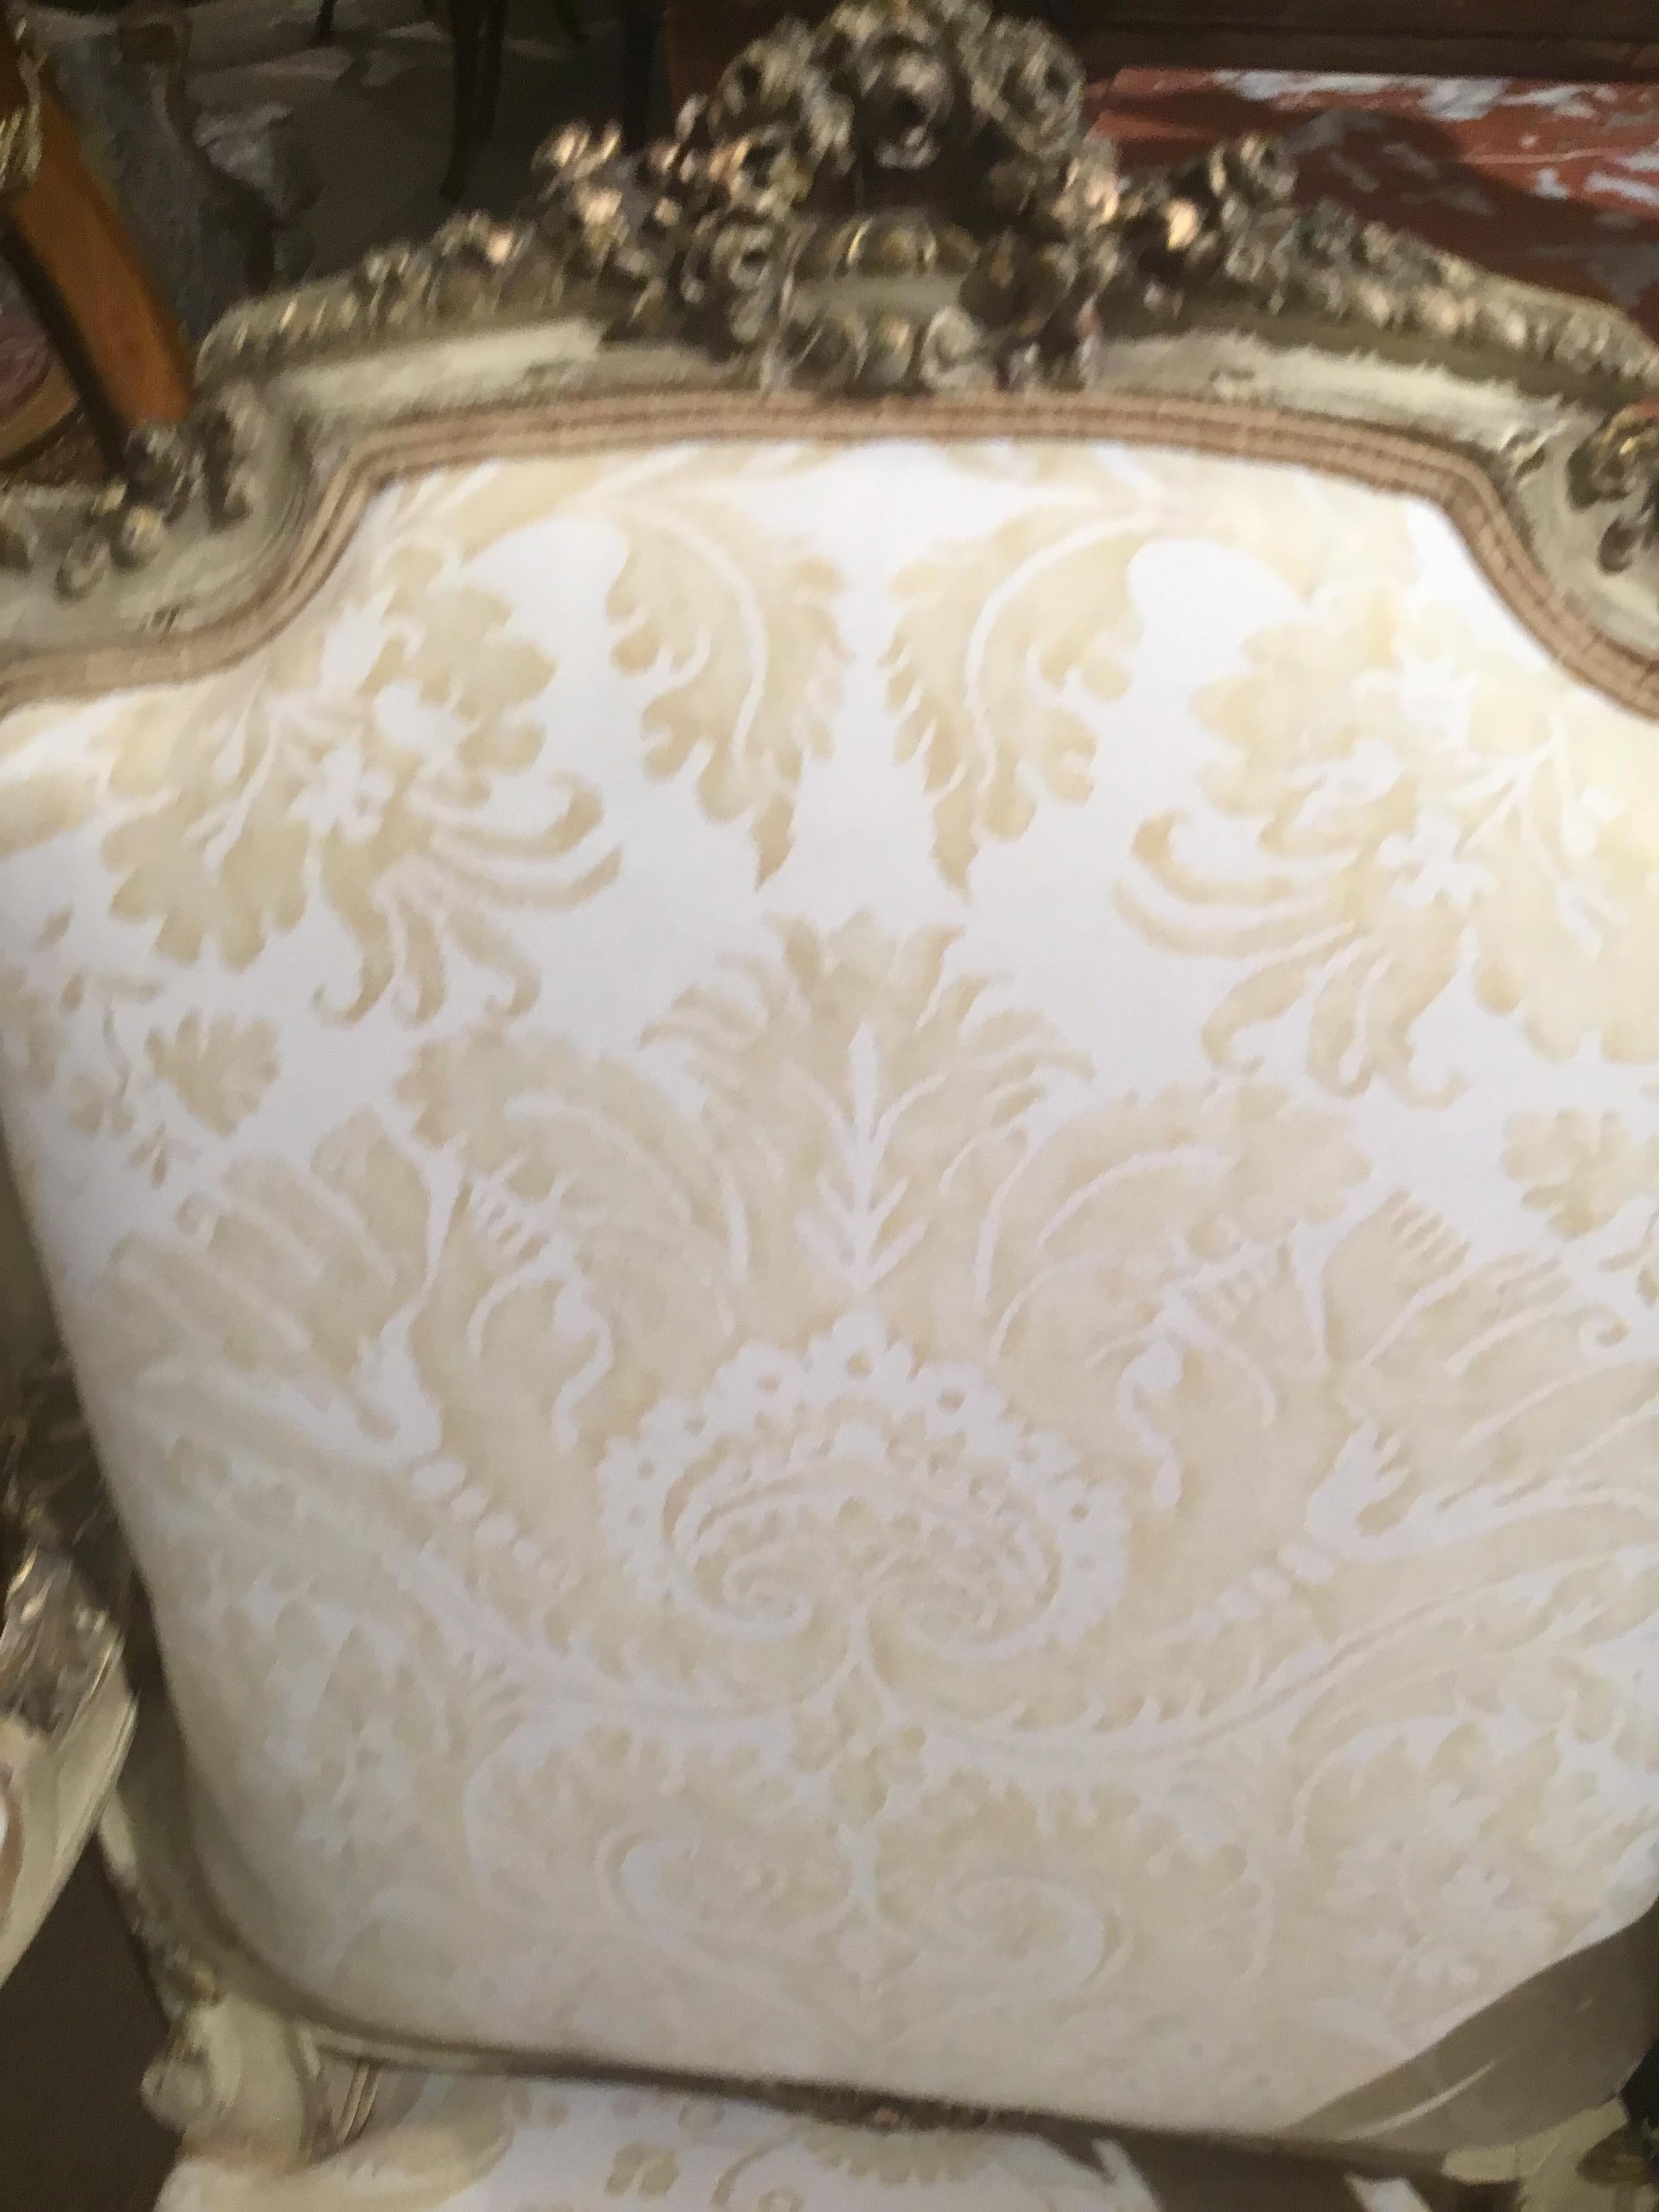 Parcel paint and parcel giltwood carved 19th century armchair/ fauteuils
Upholstered in new Fortuny fabric. The finish is in antique condition,
With lovely shades of cream paint and highlights F-gold gilt. A crest of
Flowers is centered at the